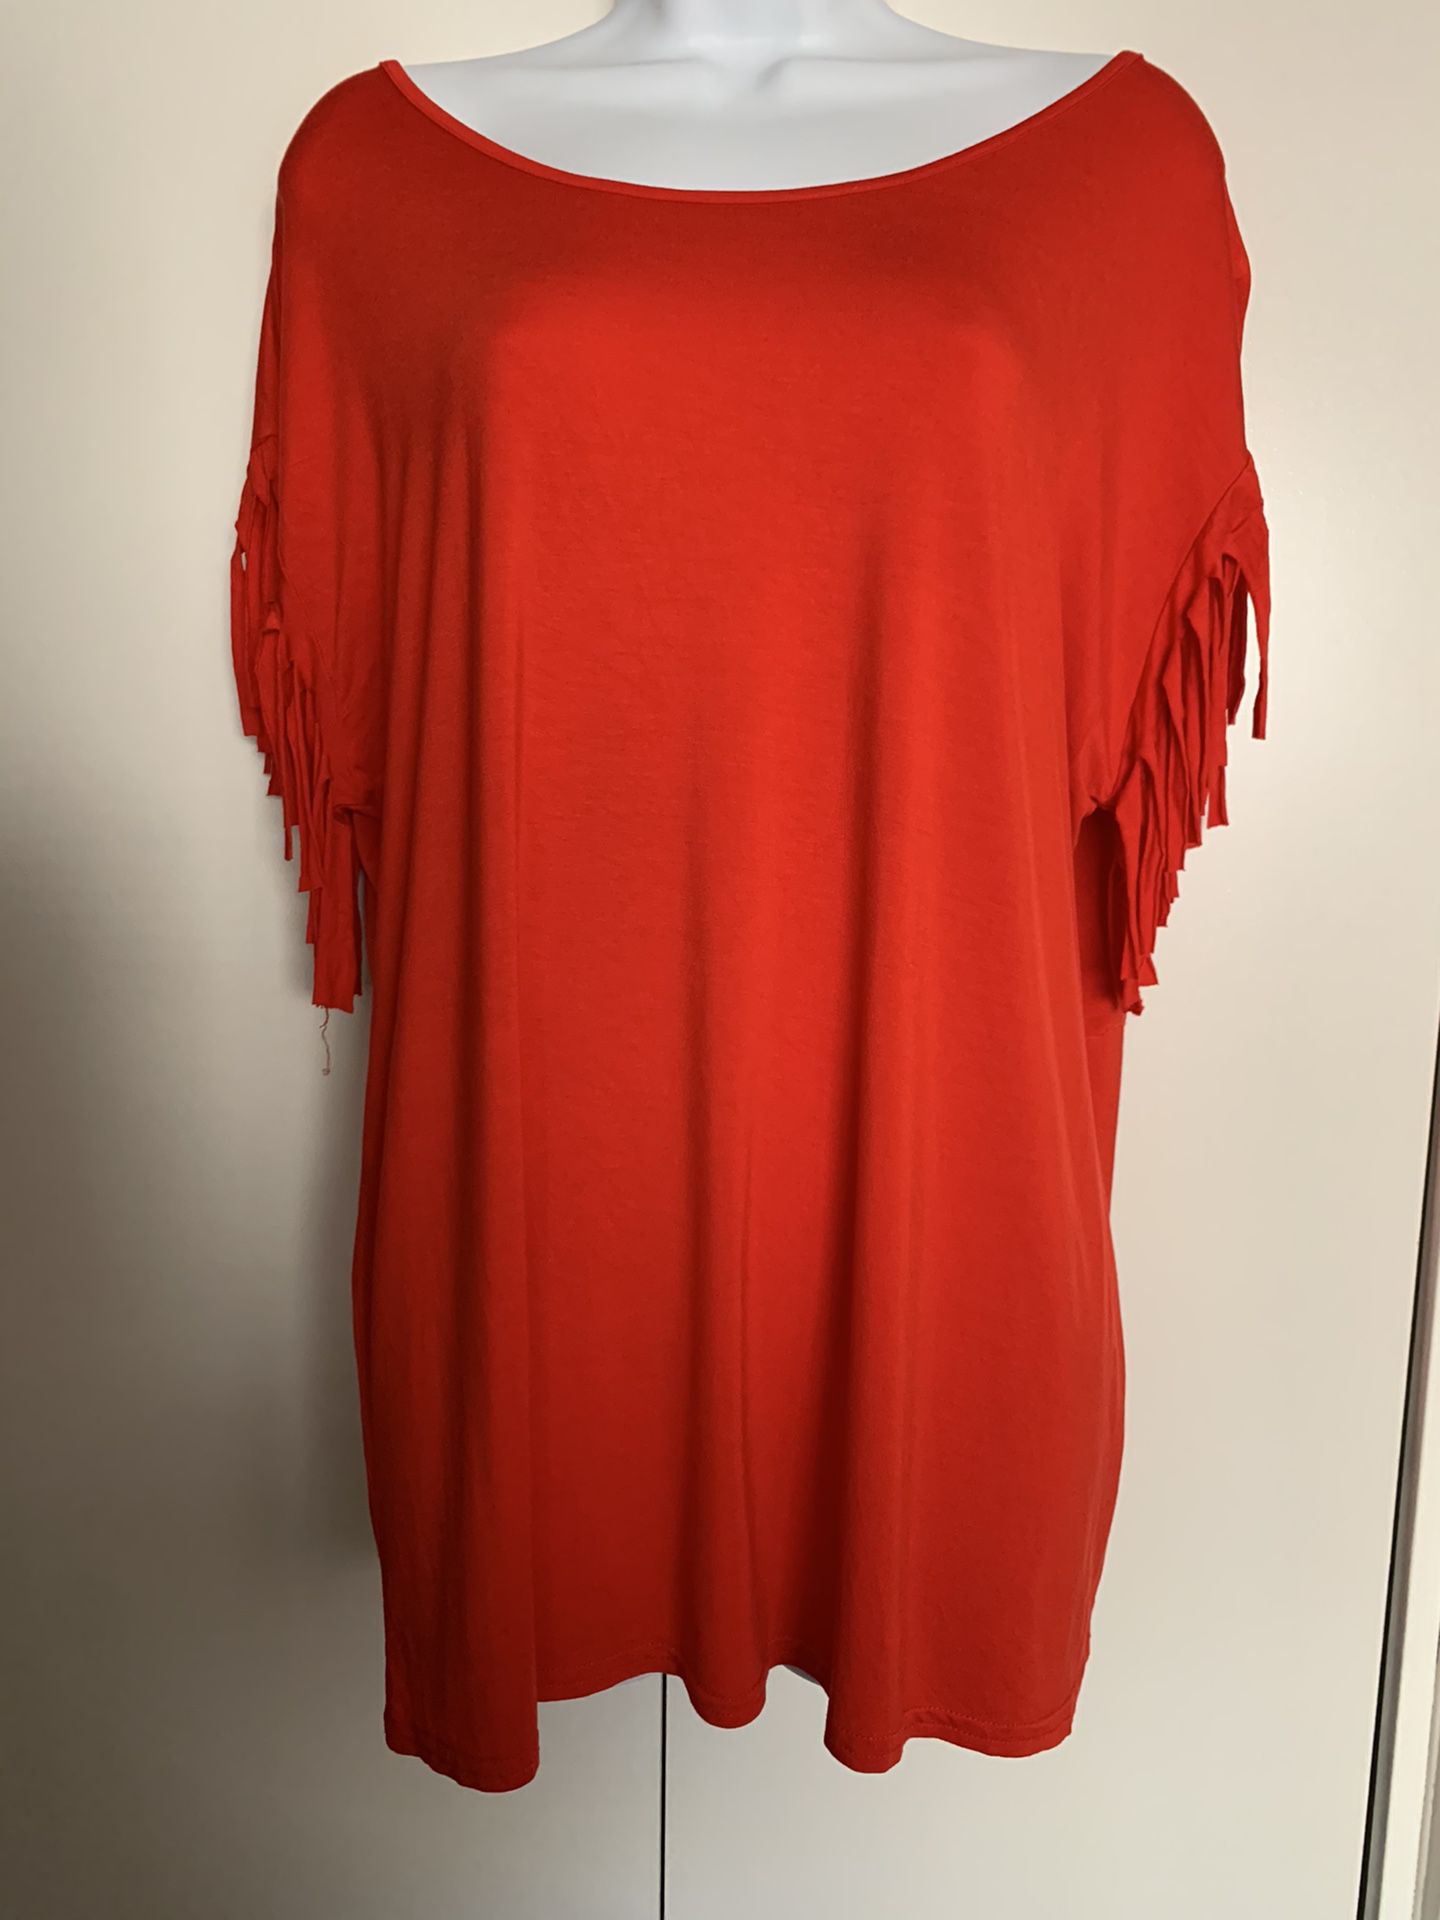 Fringed Sleeve Red Top- Comfy and Cute! Size XL